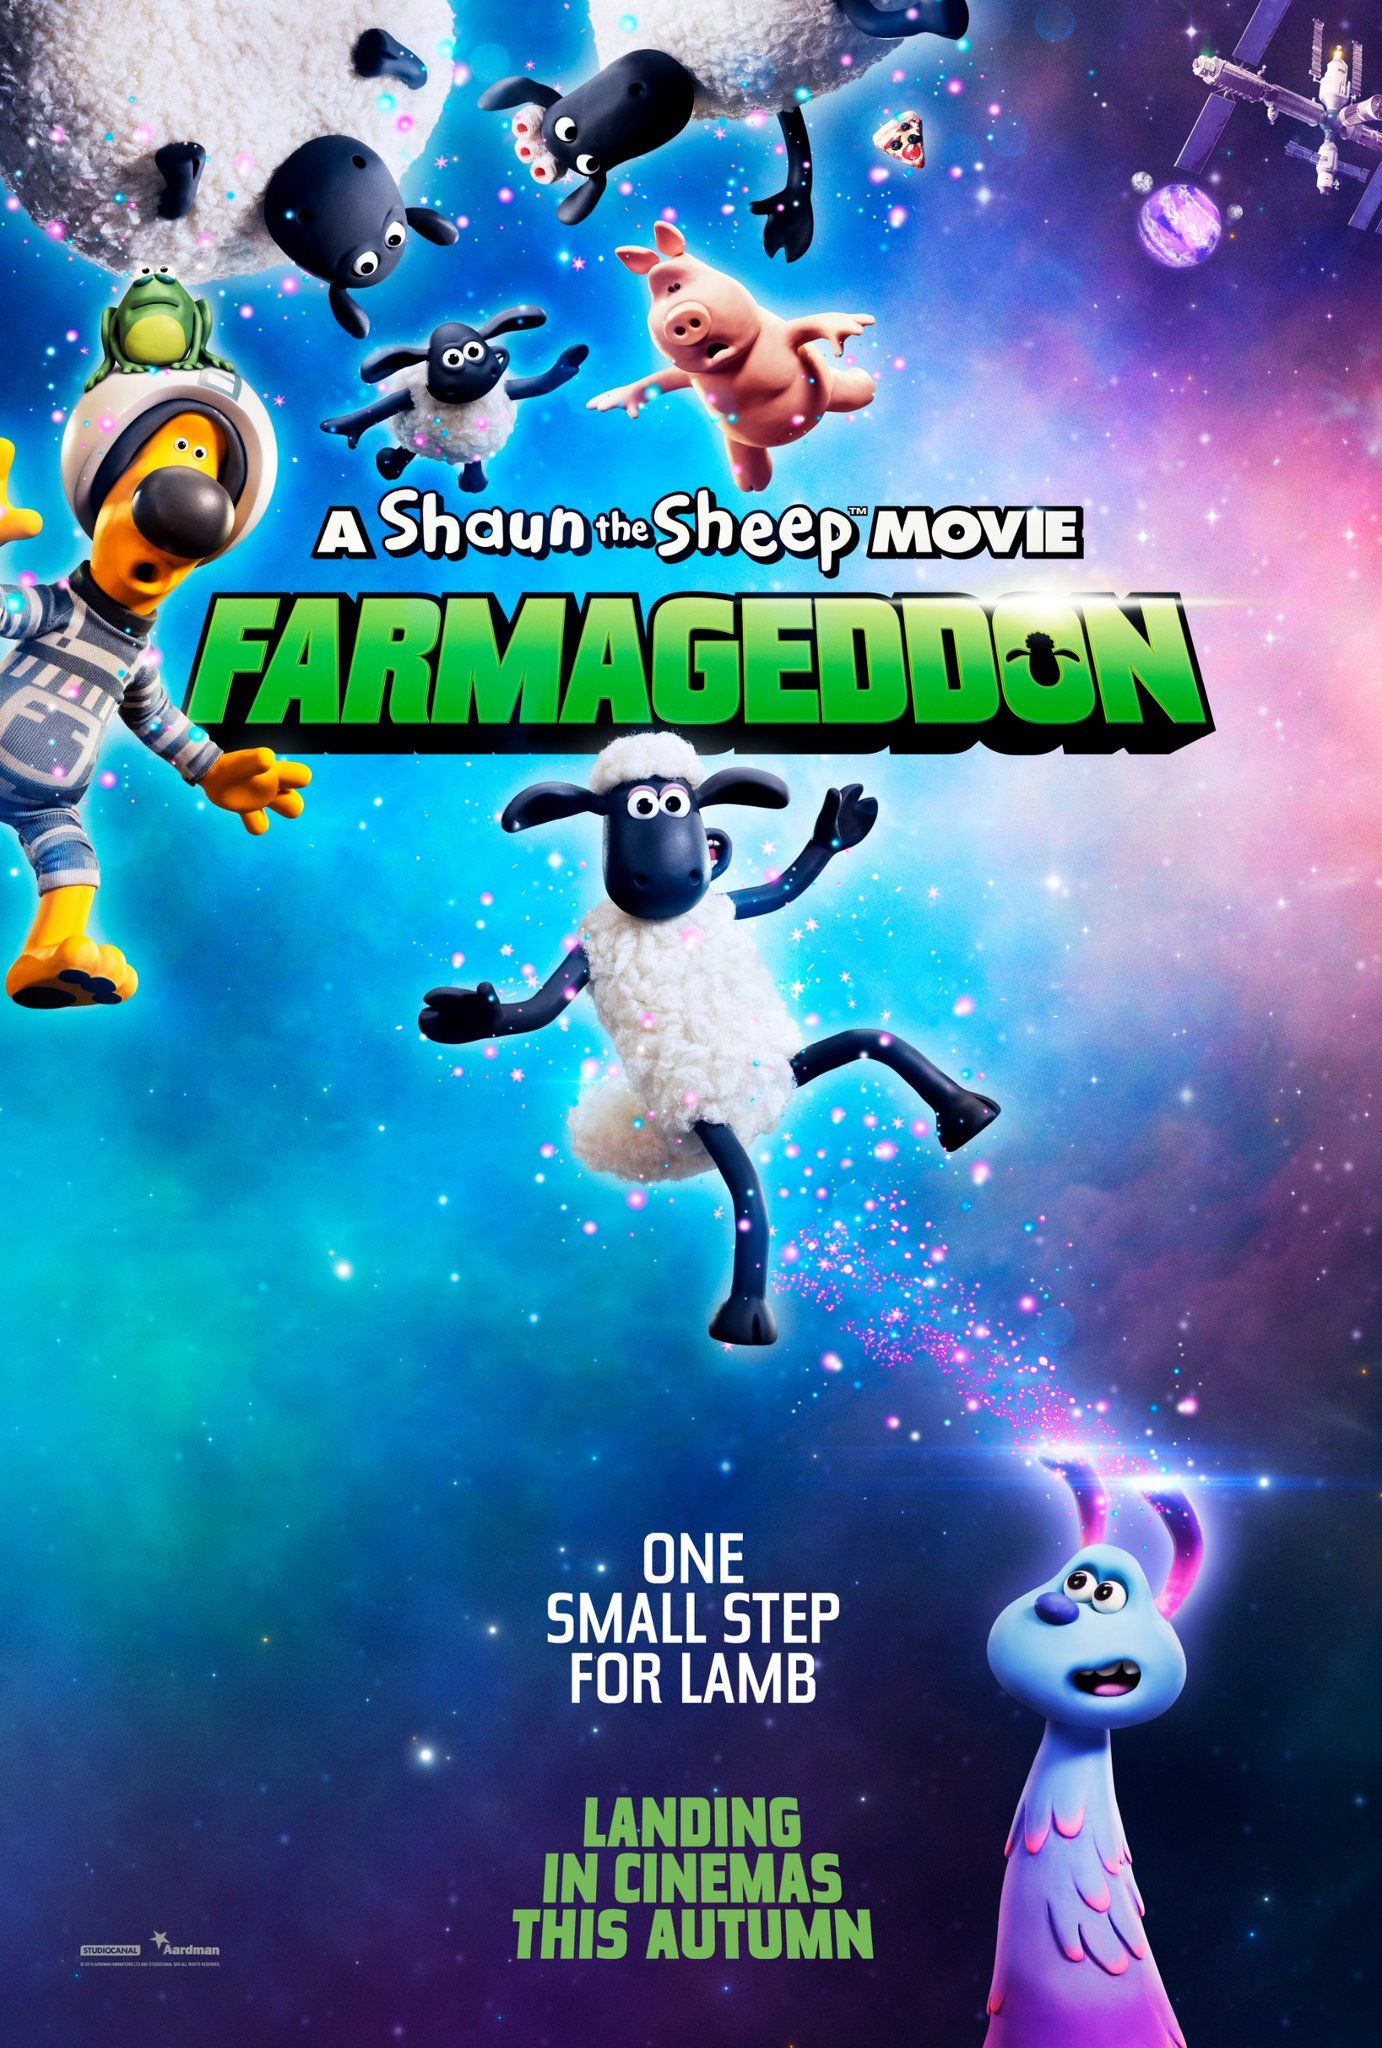 a-shaun-the-sheep-movie-farmageddon-new-trailer-gets-abducted